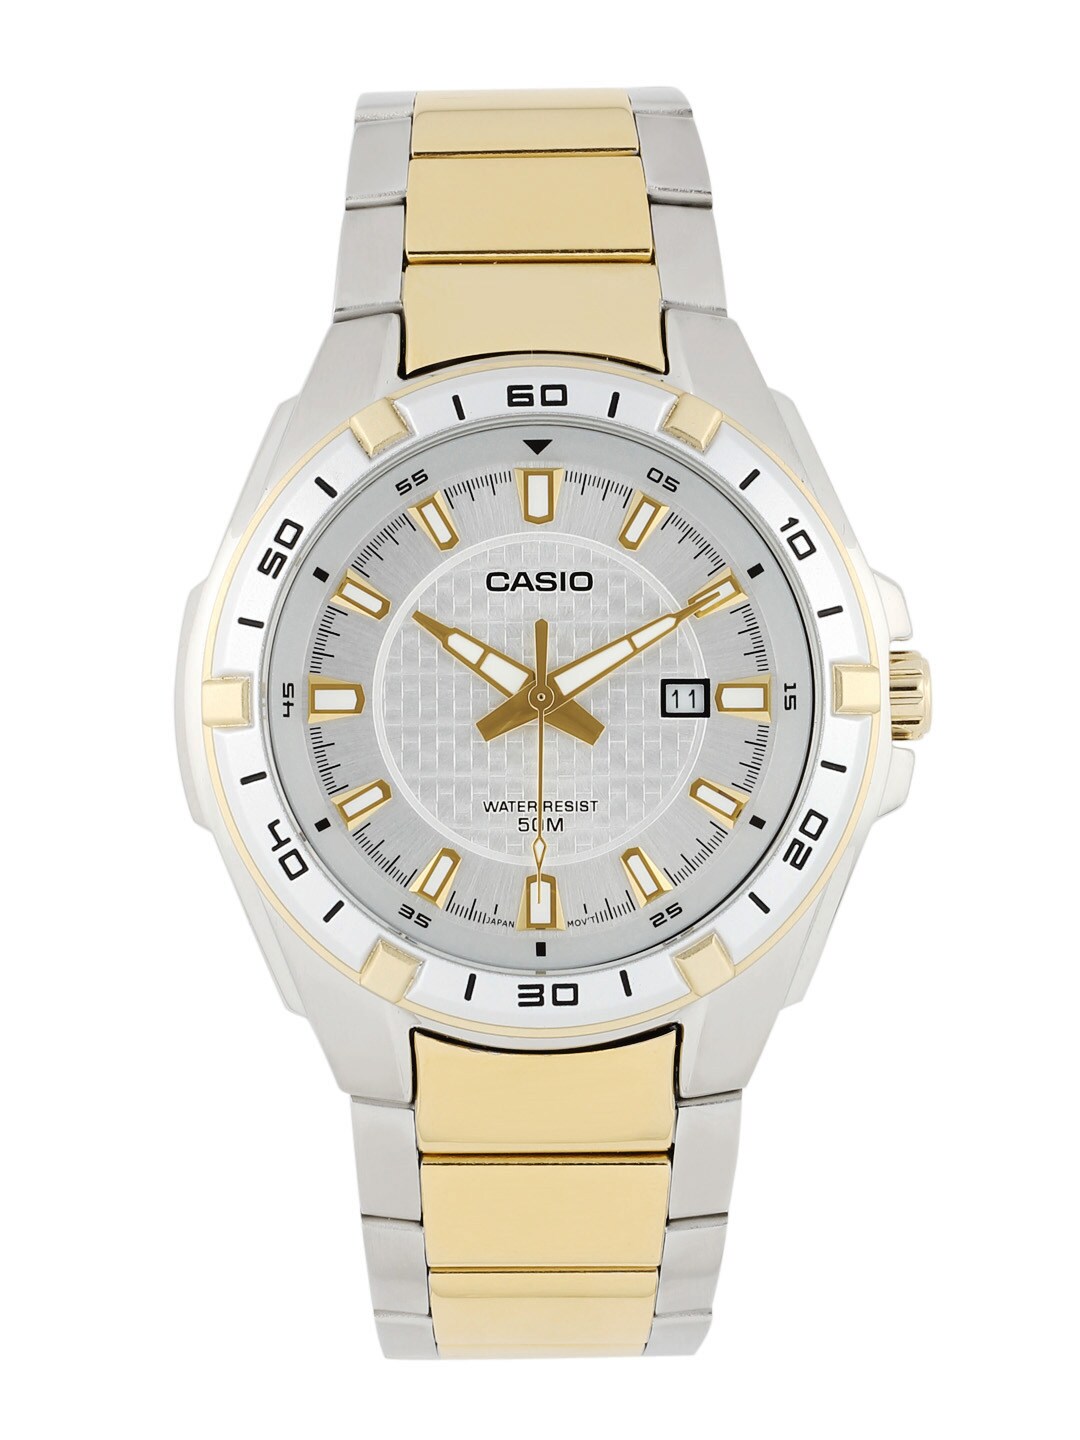 CASIO ENTICER Men Silver-Toned Dial Analogue Watch A522